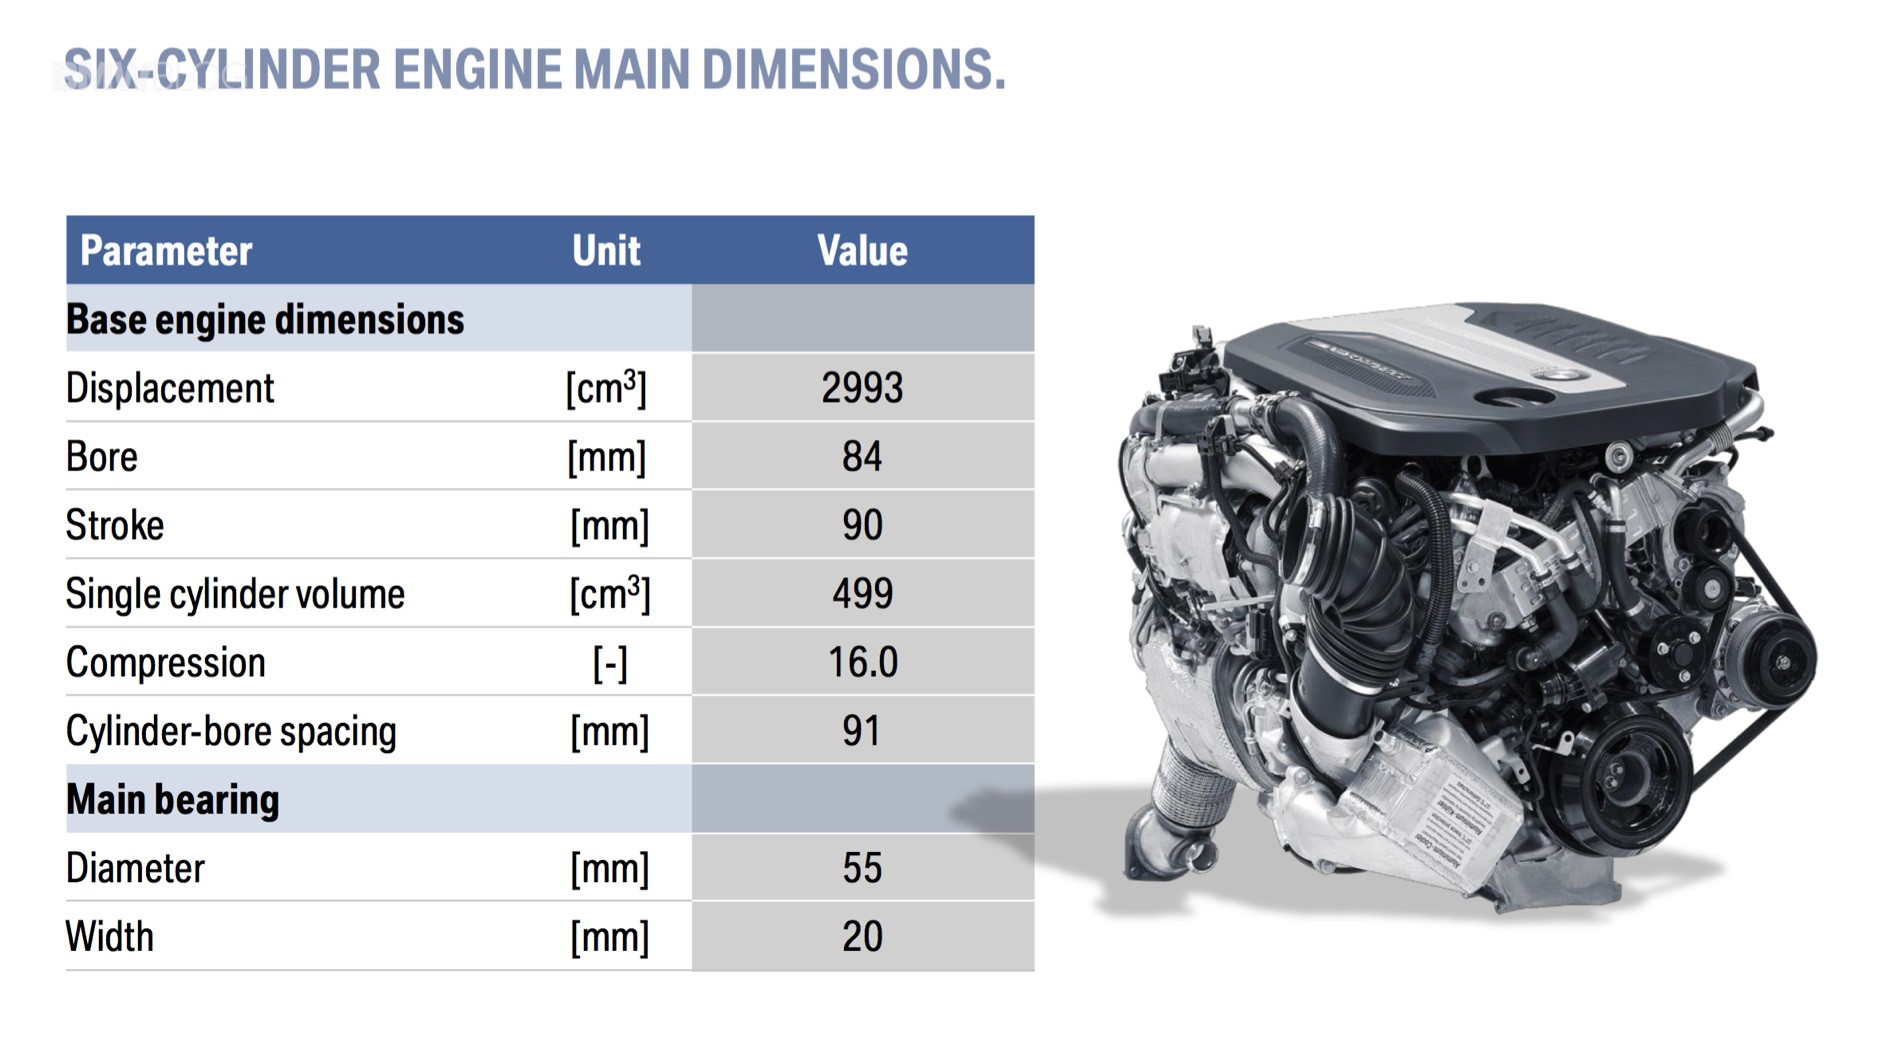 Turbocharger Parts Diagram Full Details On the New Bmw Quad Turbo Sel B57 Engine Of Turbocharger Parts Diagram